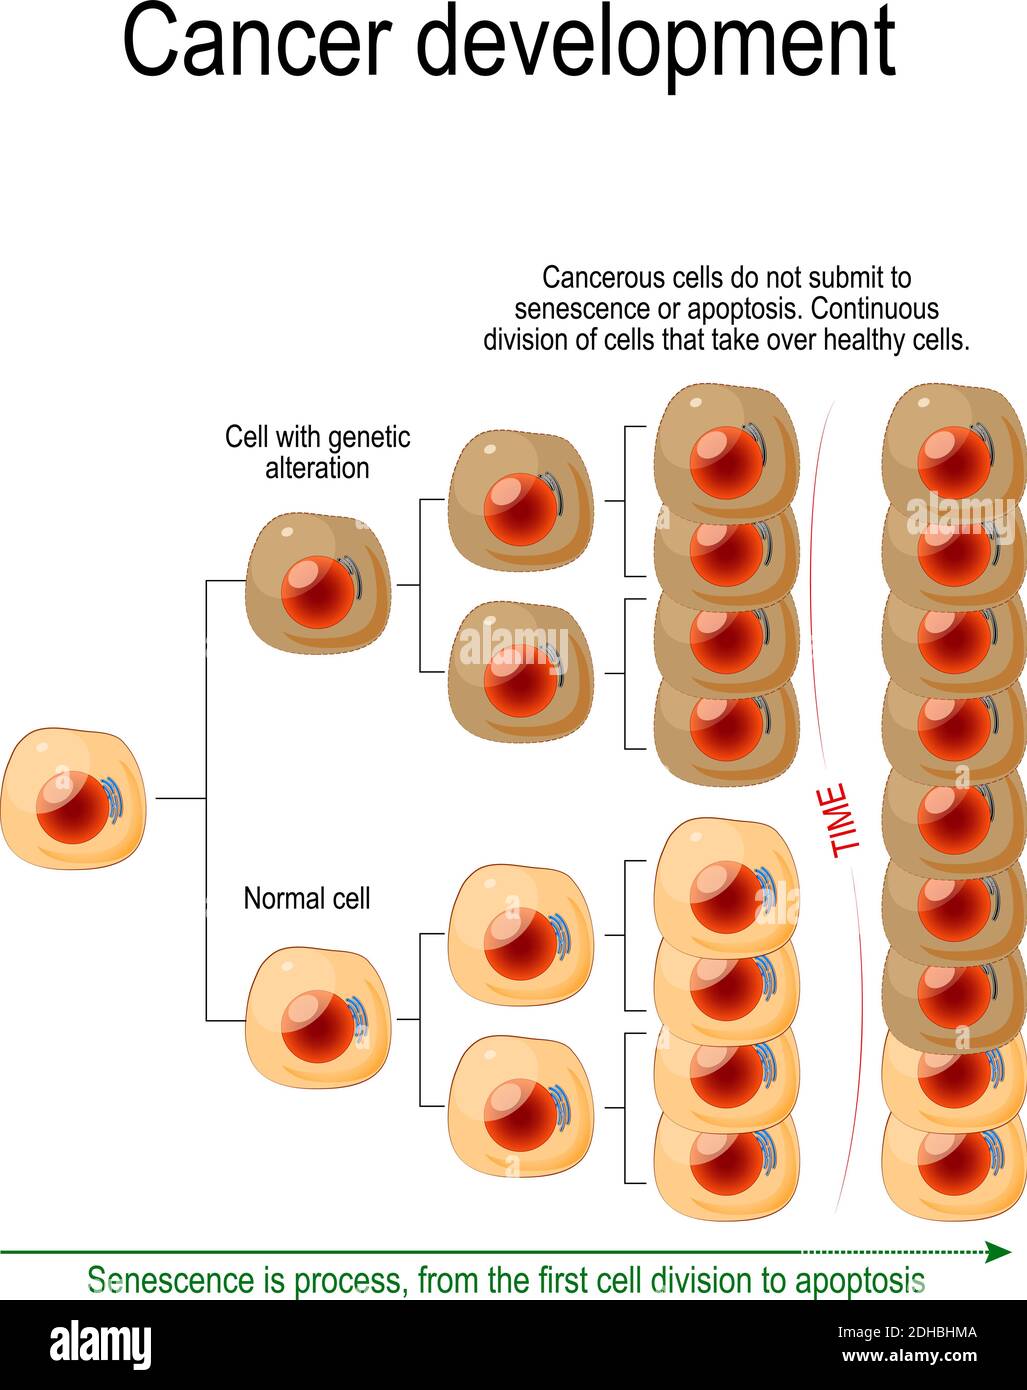 Cancer Development. Cancerous cells do not submit to senescence or apoptosis. Сontinuous division of cells that take over healthy cells. Vector Stock Vector